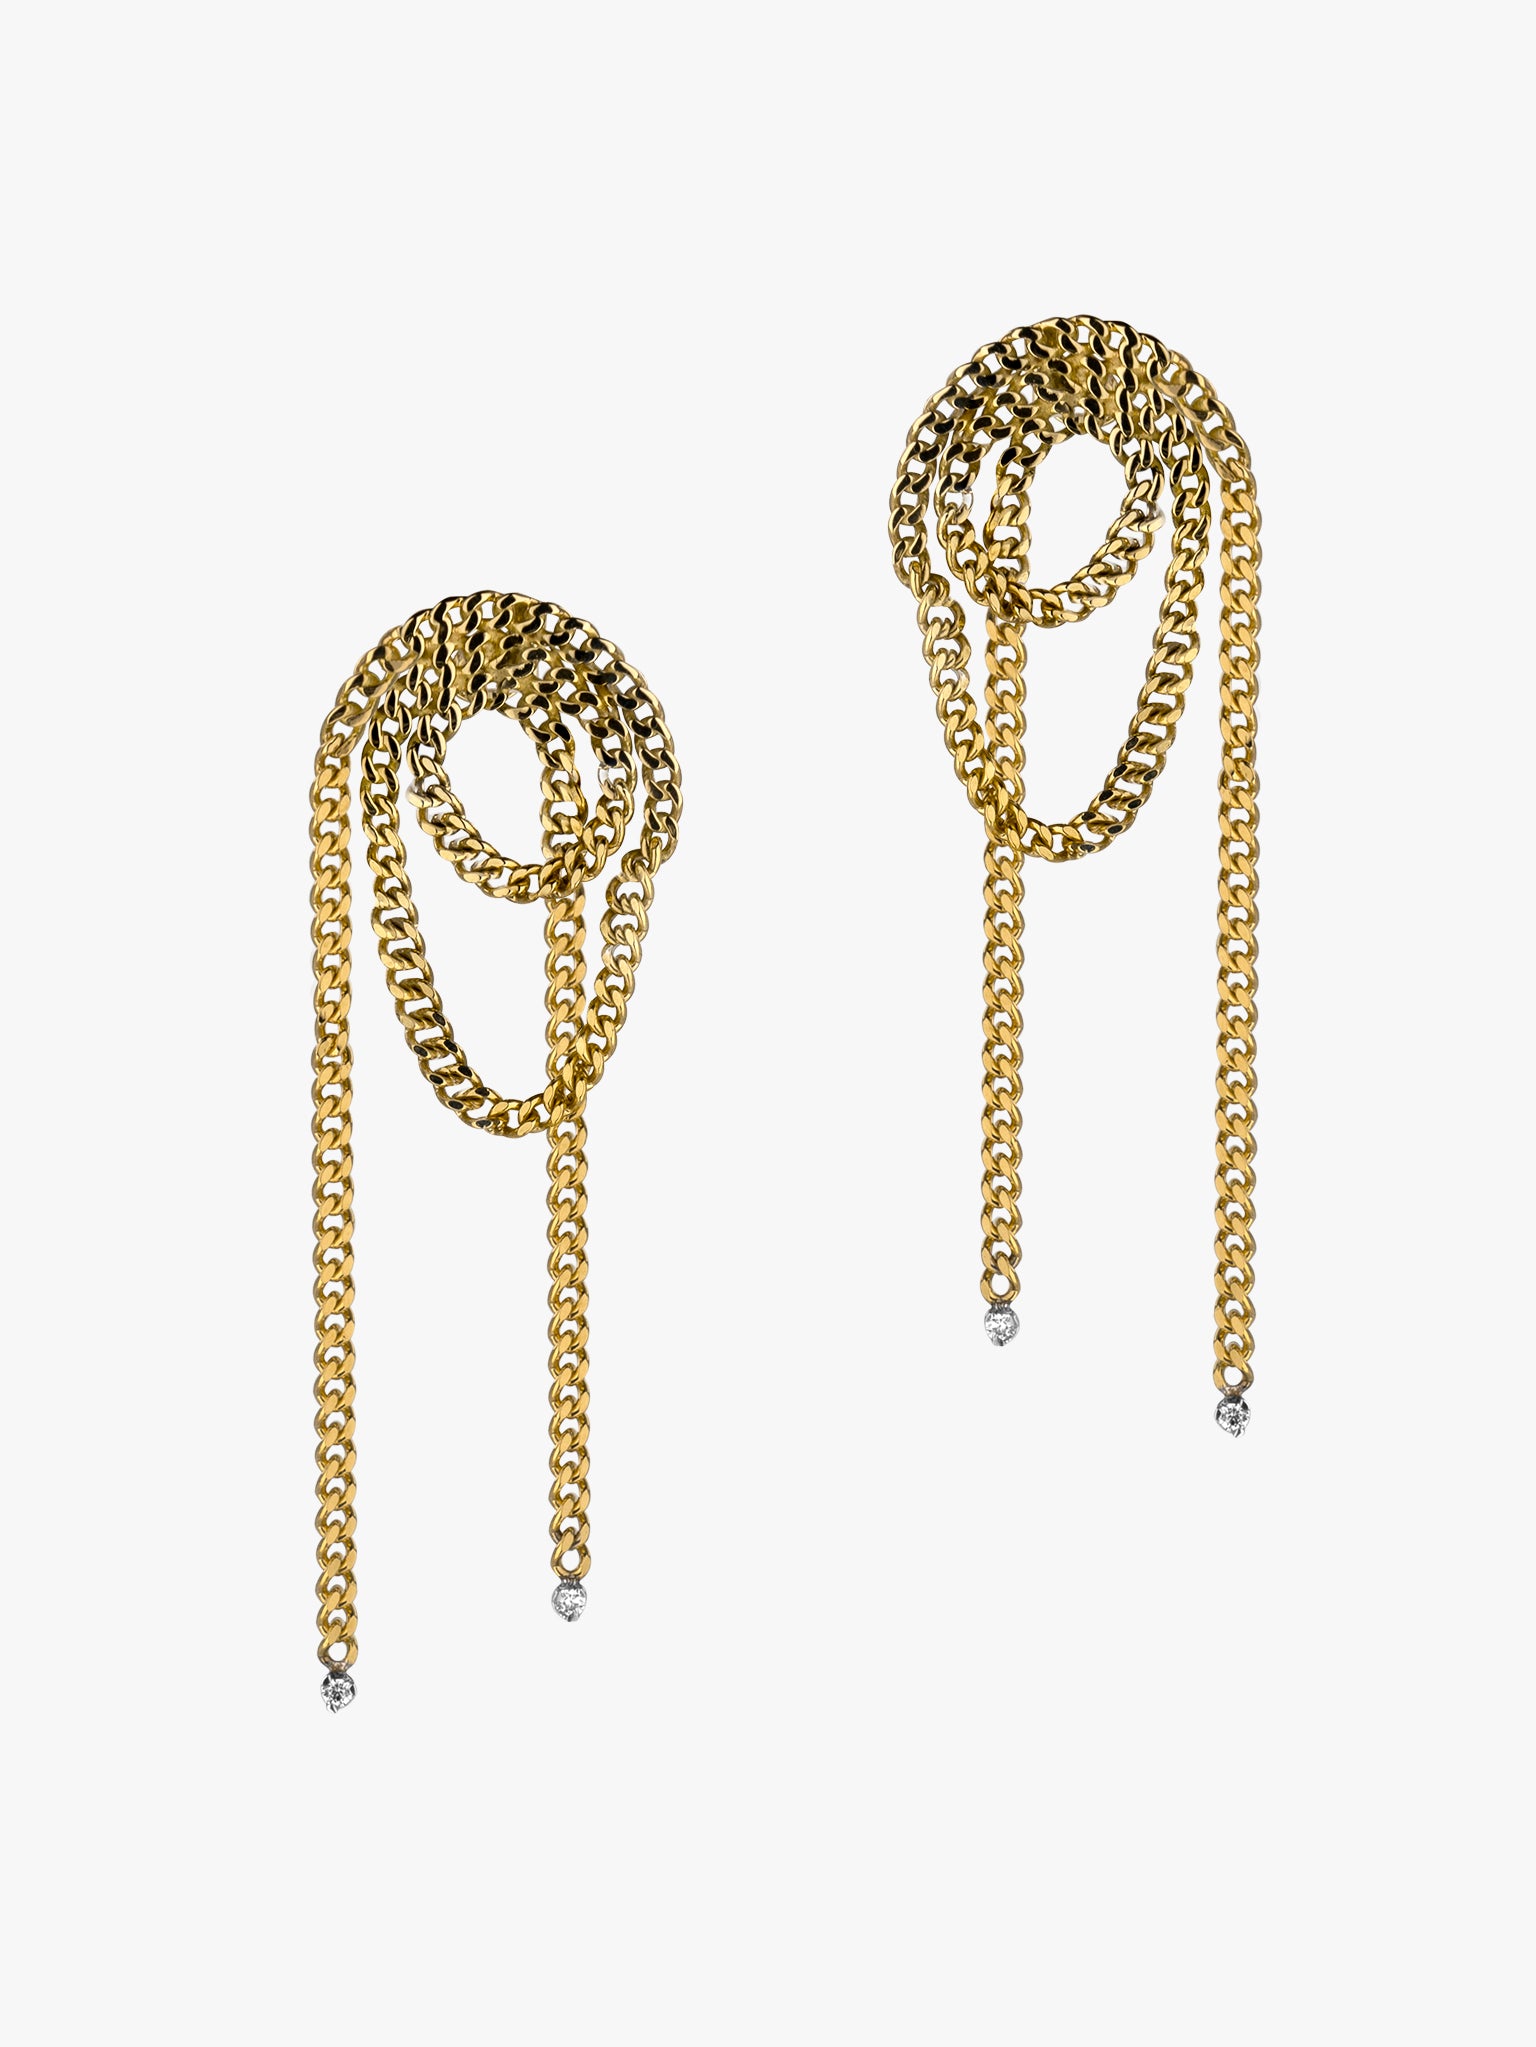 Knotted chain and diamond drop earrings